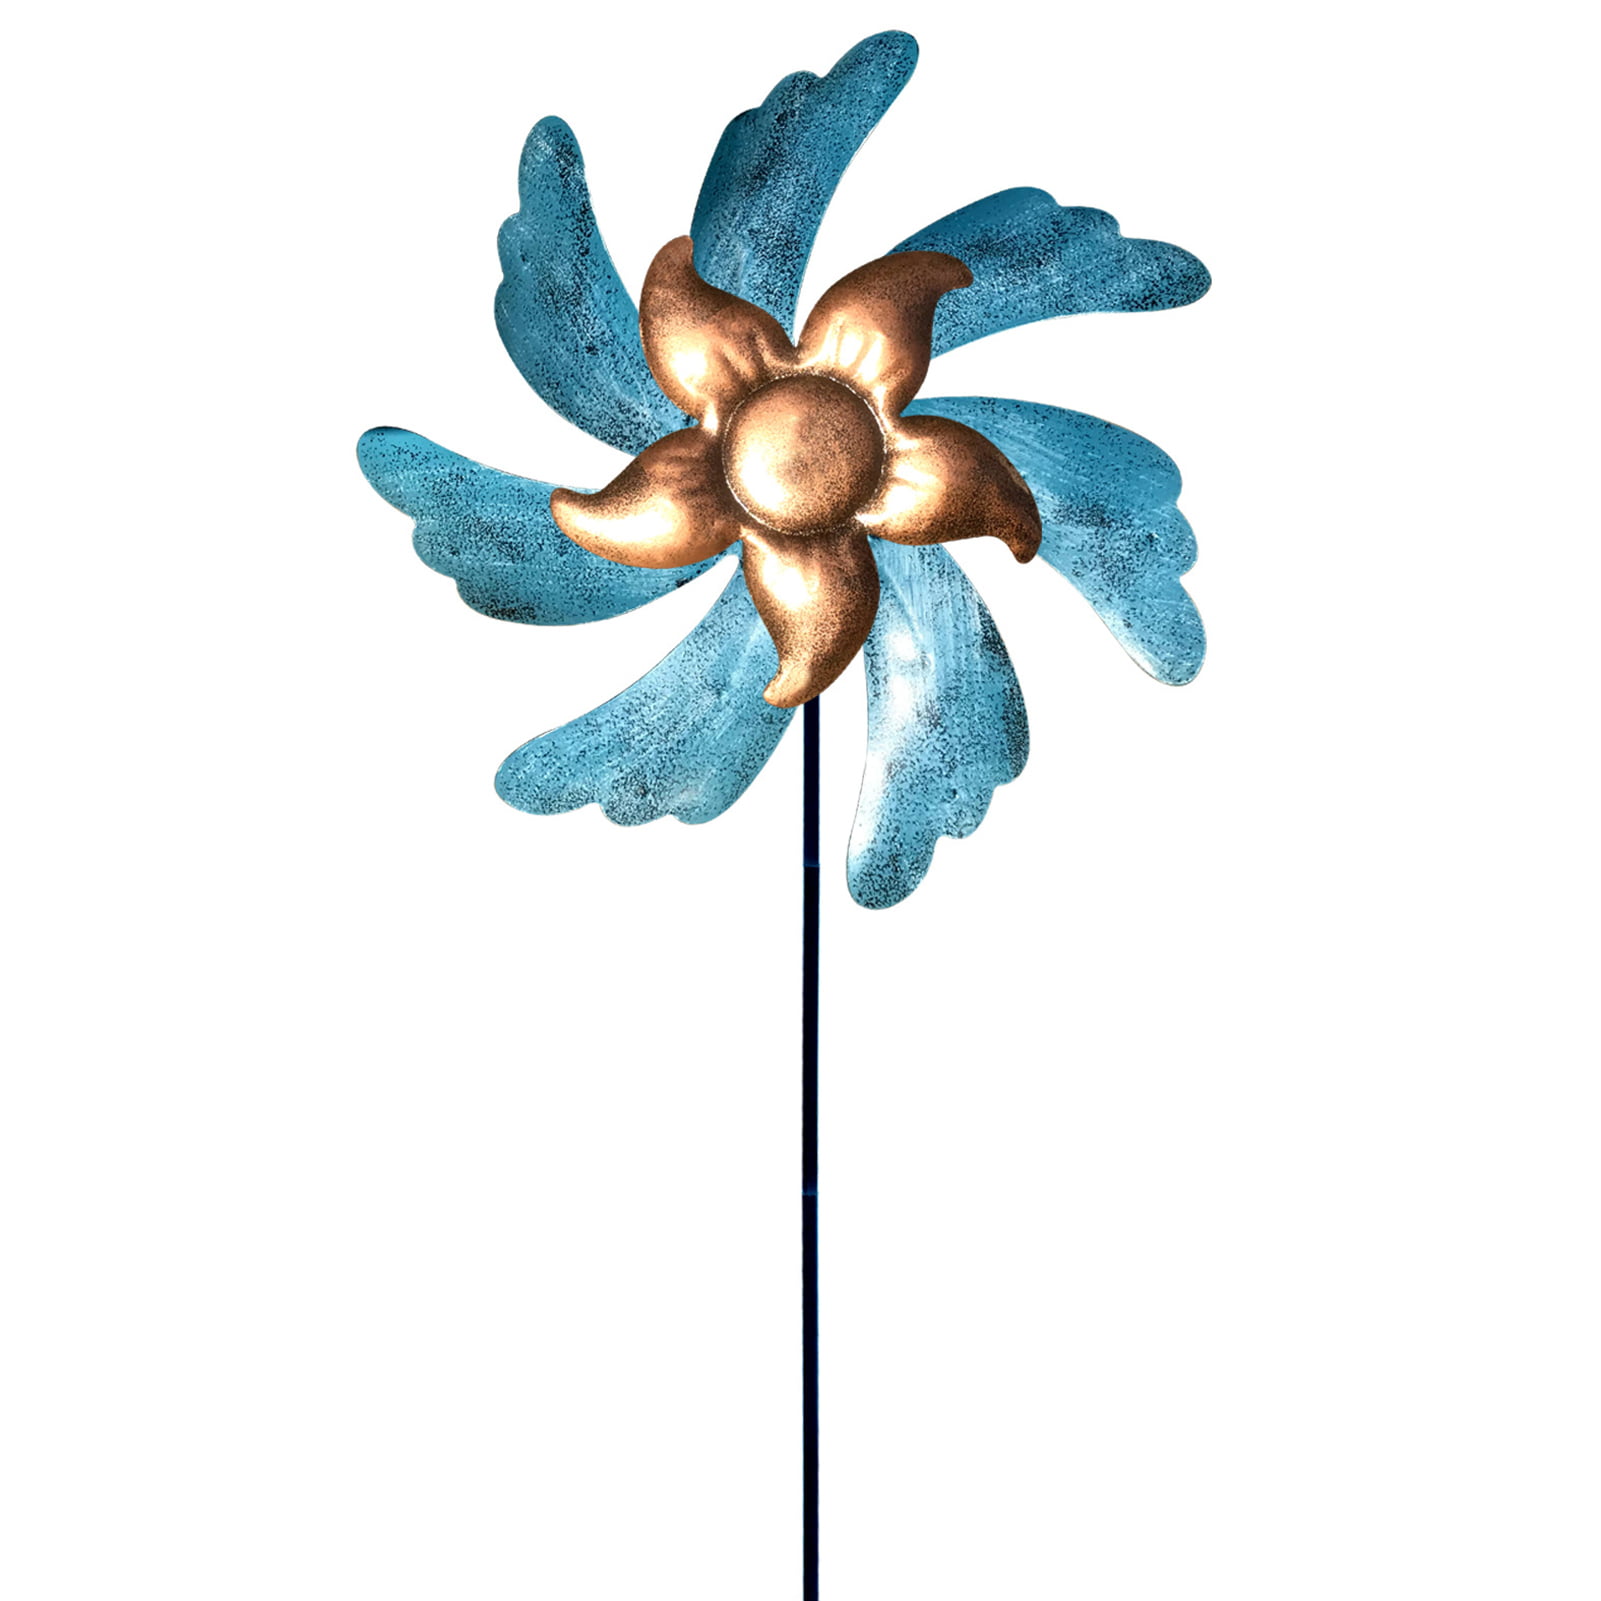 Details about   Iron Wind Spinner Anti-rust Lawn Windmill Patio Decoration Ornament Arts 